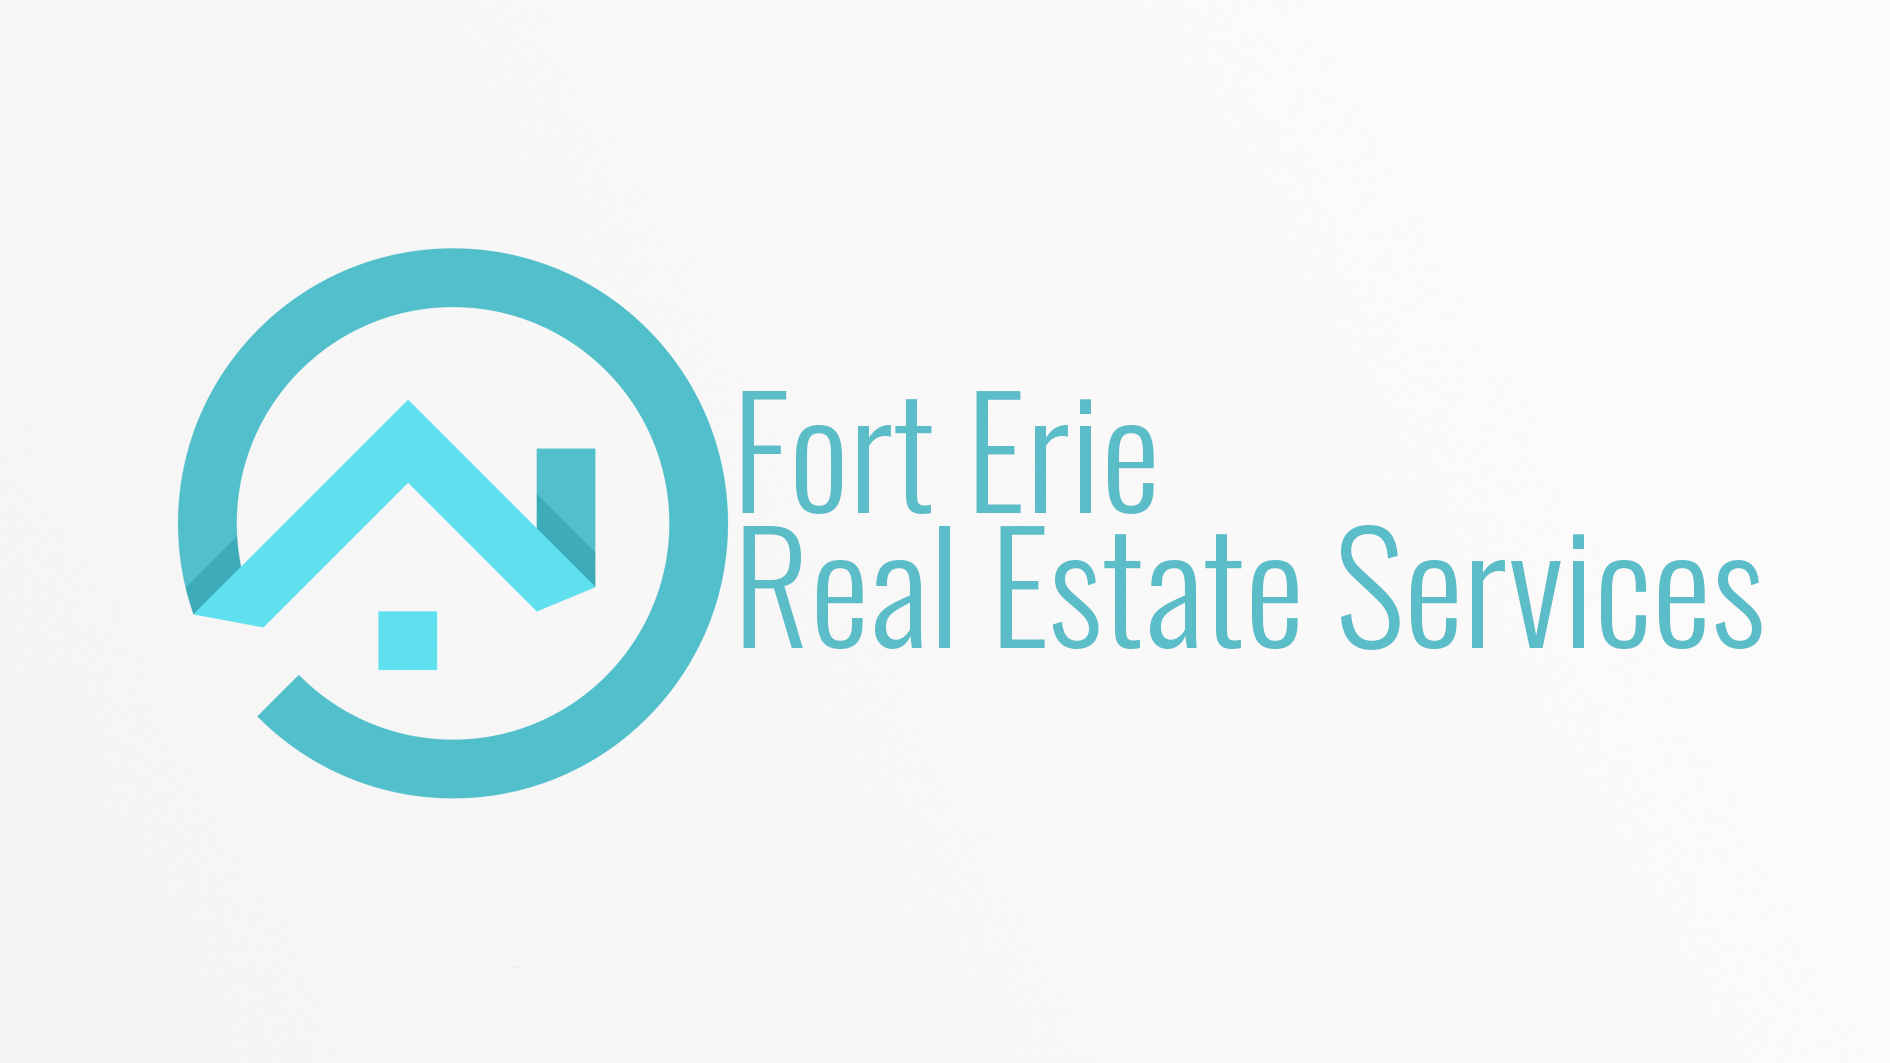 Fort Erie Real Estate Services